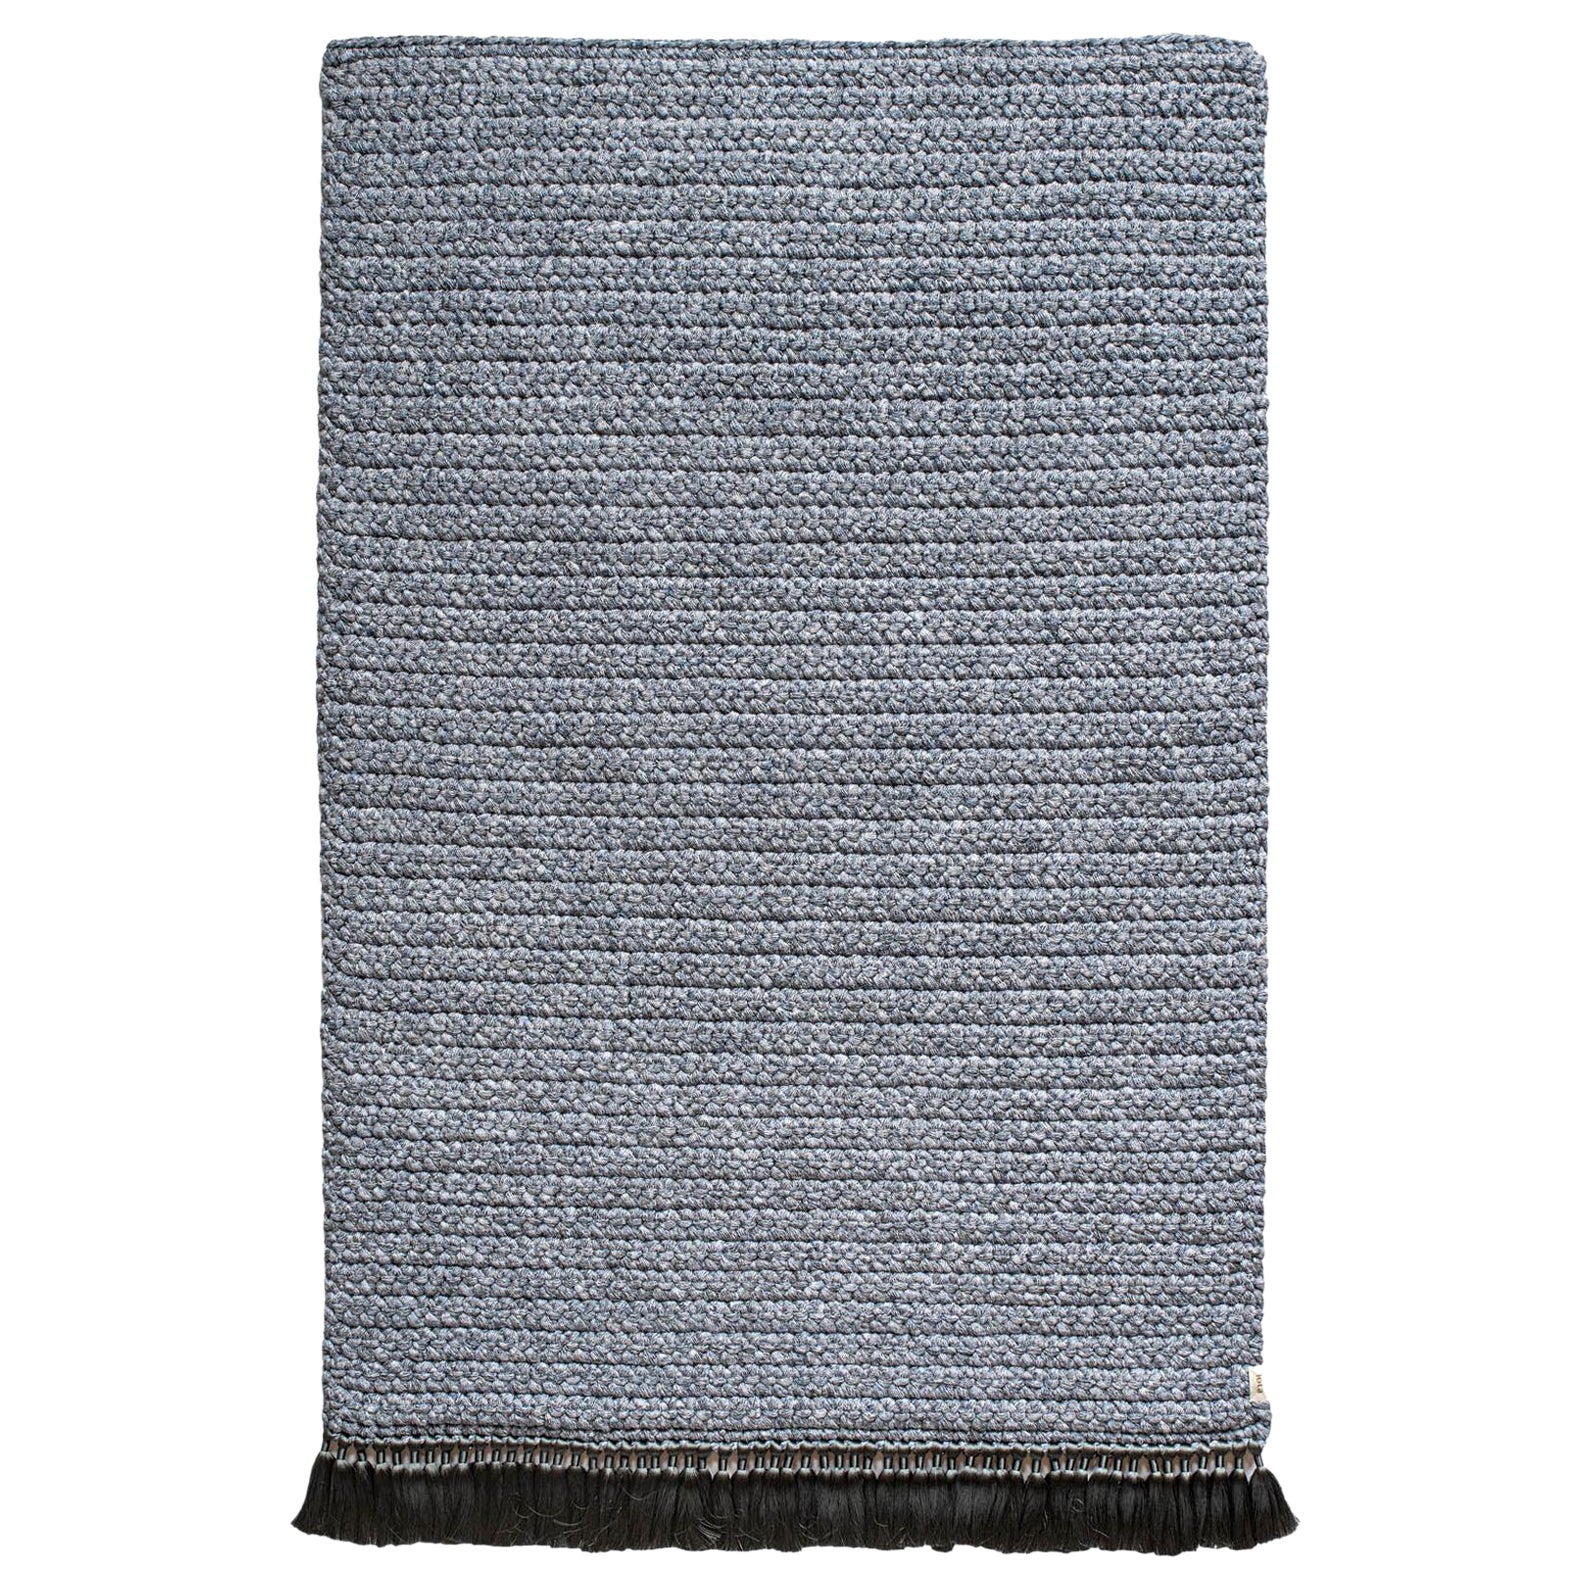 Handmade Crochet Thick Rug 120x200 cm in Blue Grey Colors with Grey Tassels For Sale